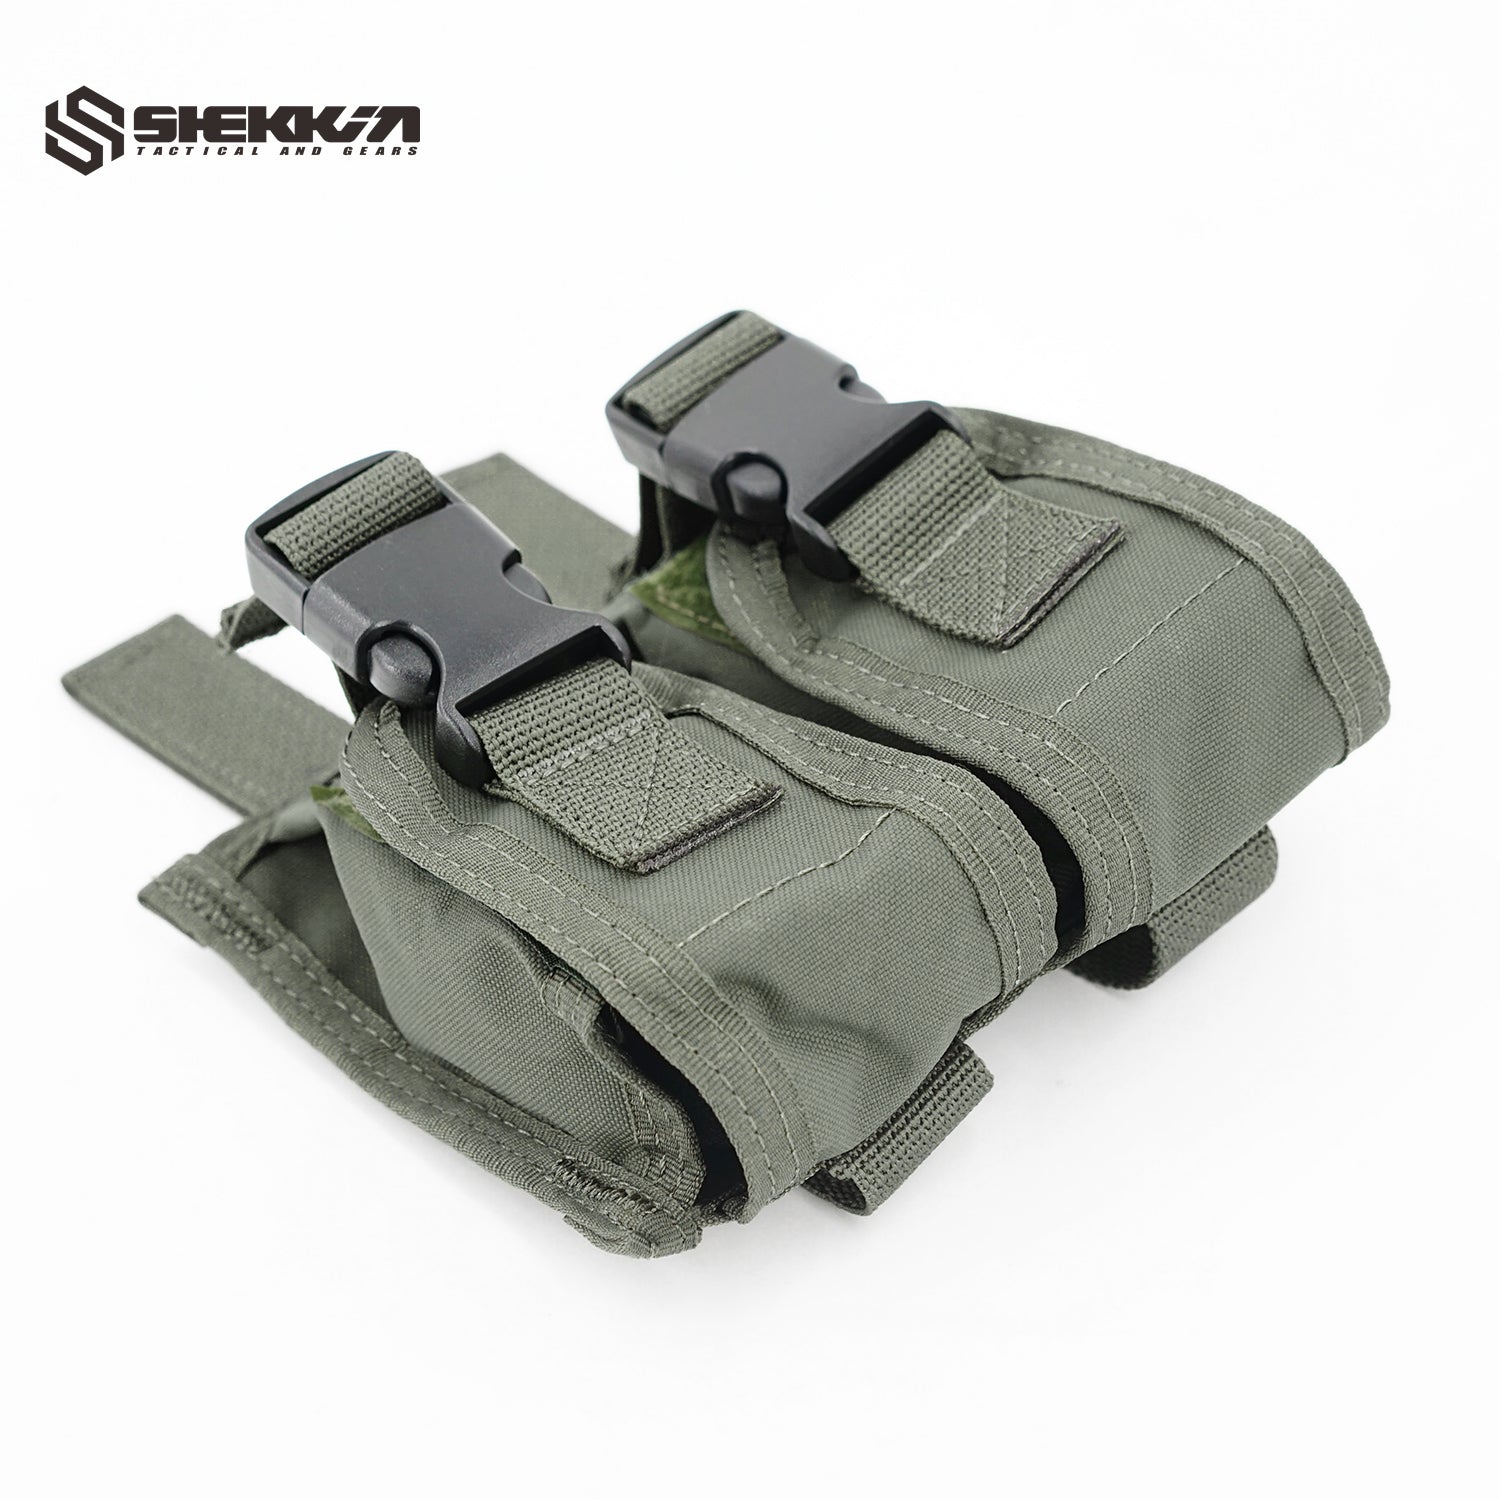 Pre MSA Paraclete style double smoke pouch with buckles - Shekkin Gears